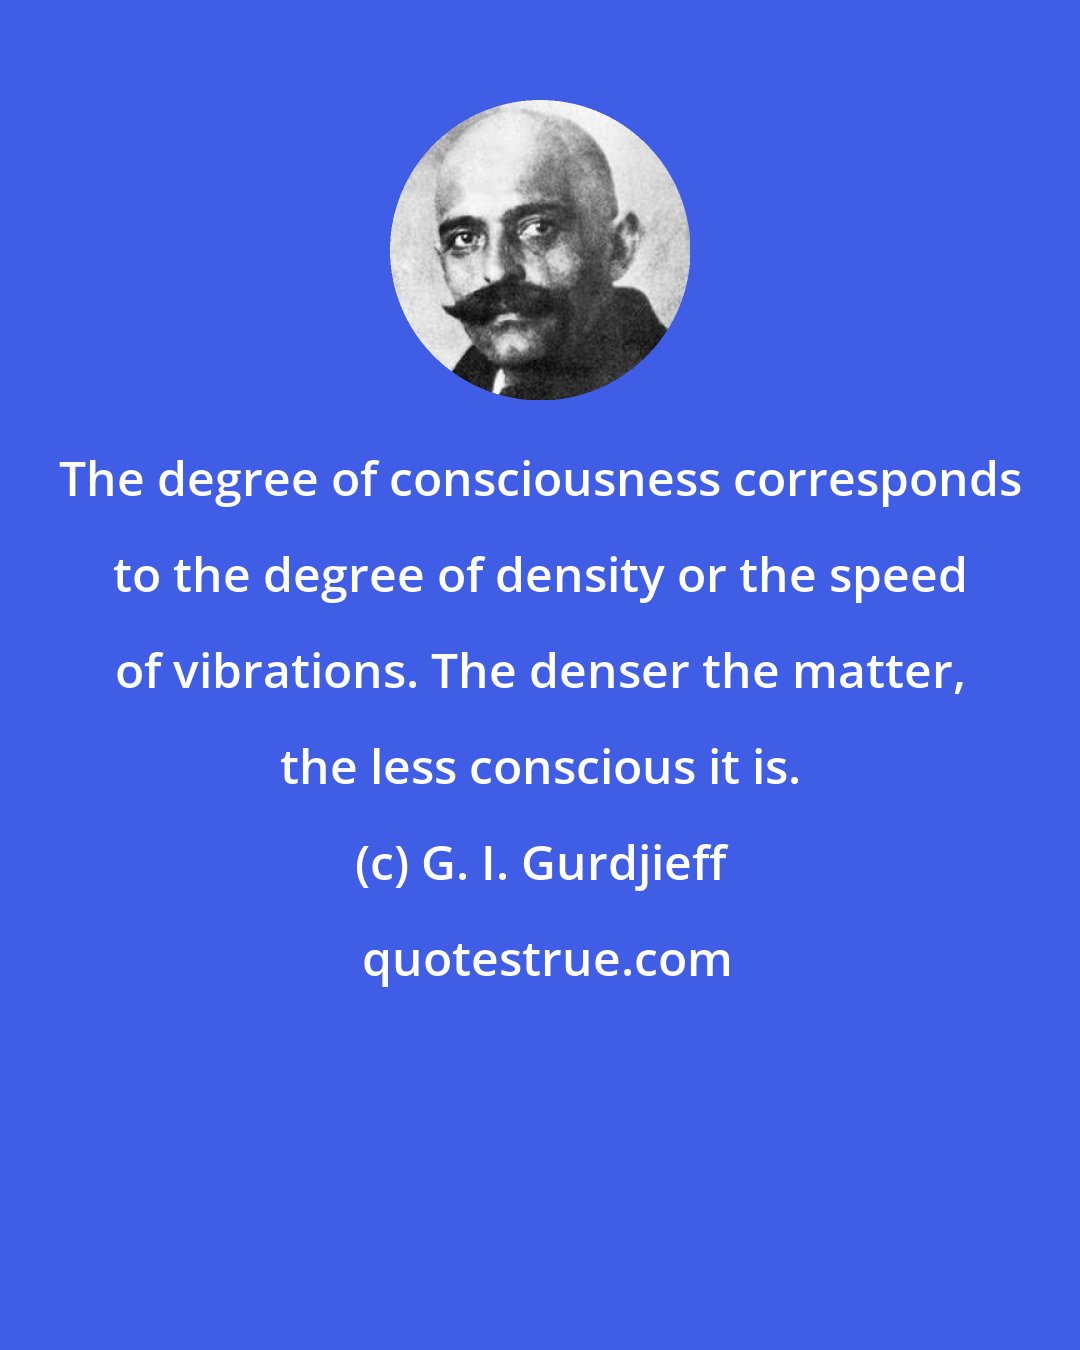 G. I. Gurdjieff: The degree of consciousness corresponds to the degree of density or the speed of vibrations. The denser the matter, the less conscious it is.